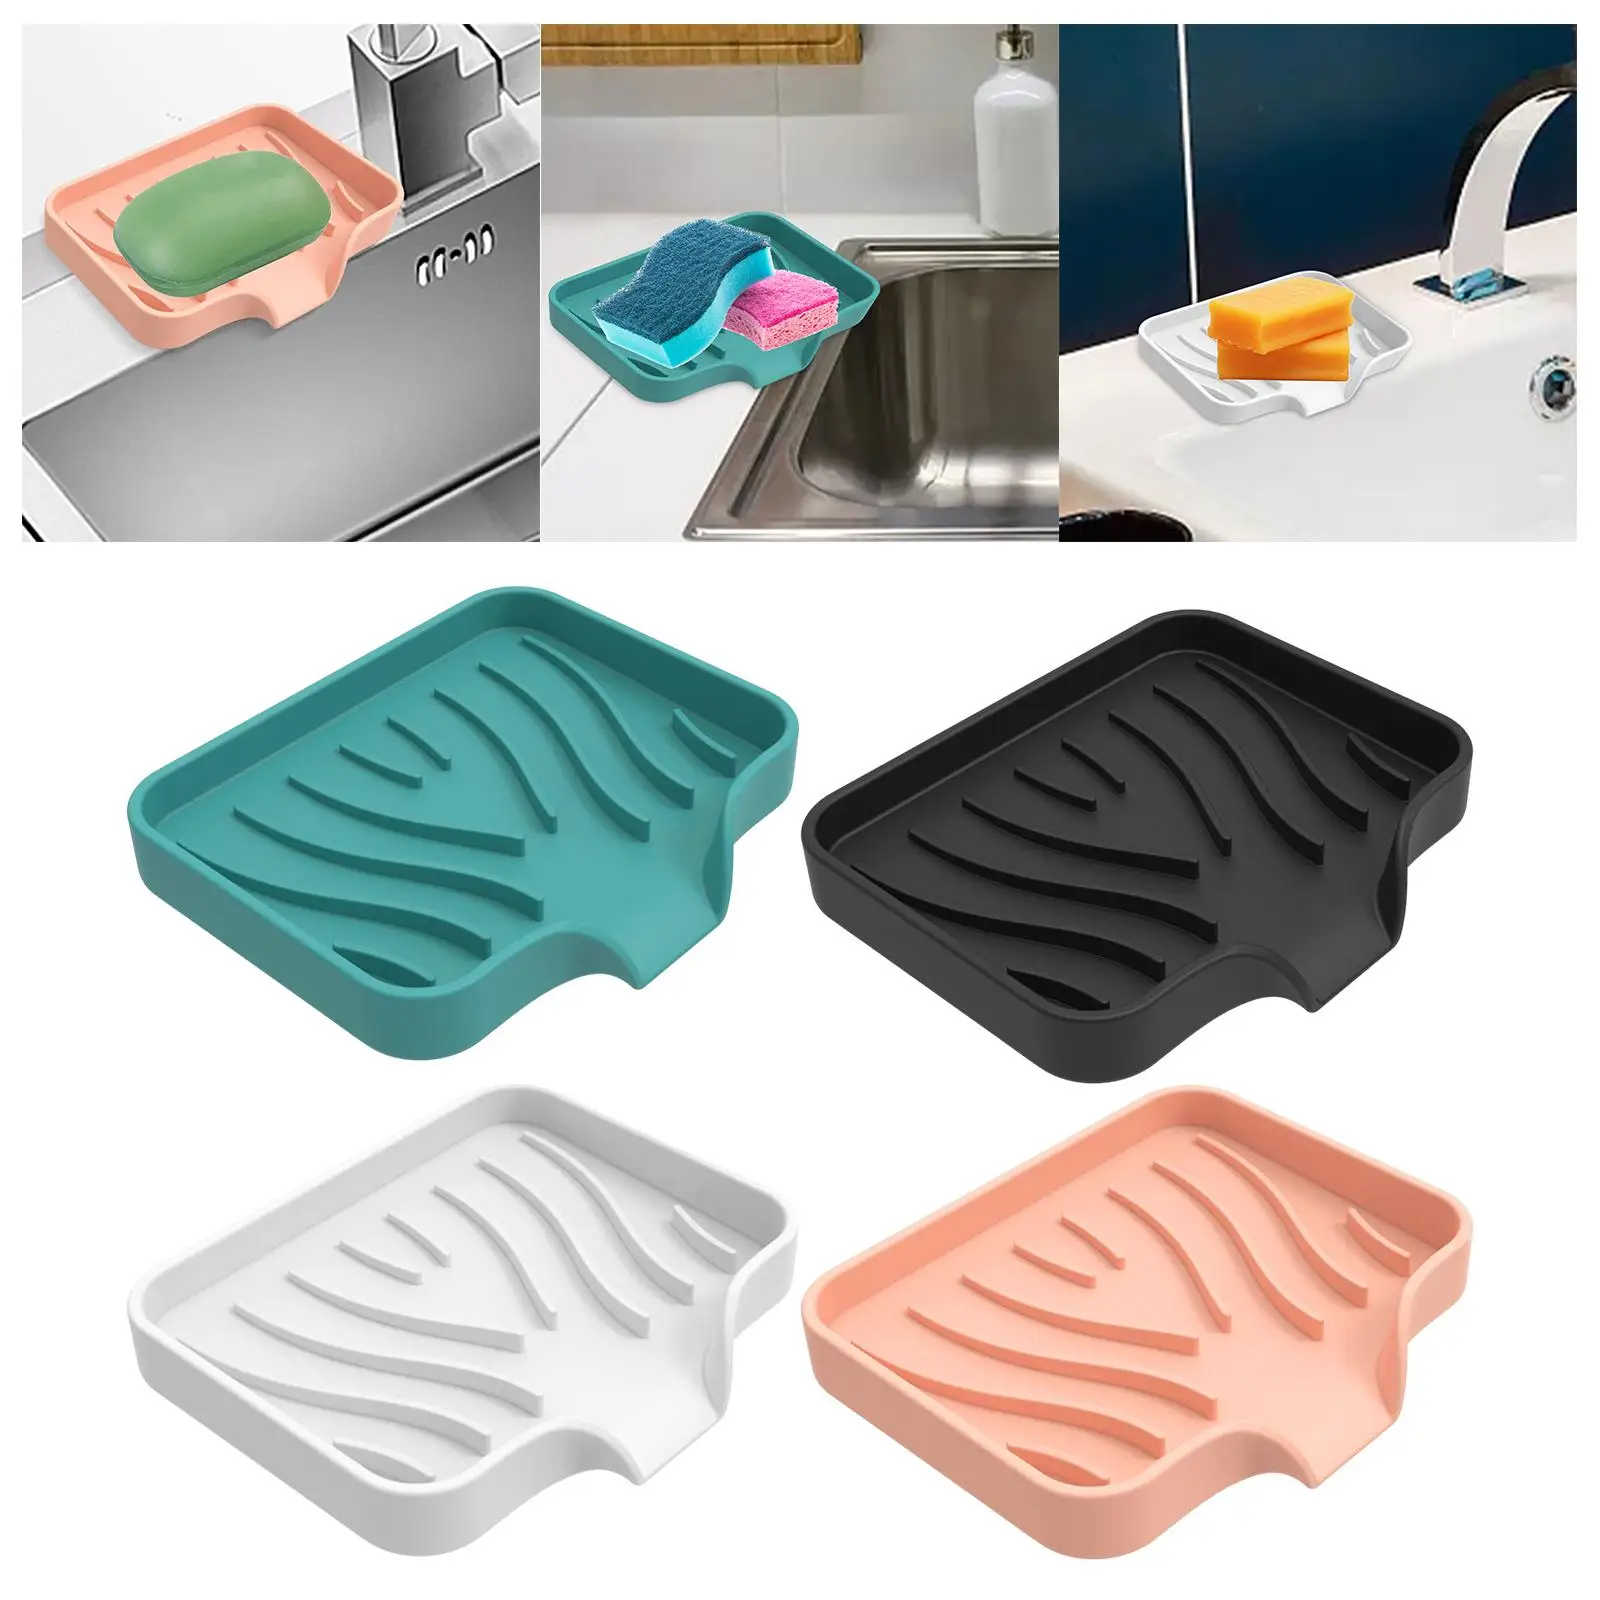 Portable Soap Dish Anti Skid Decorative Self Draining Storage Case Plate Tray Soap Box for Counter Bathroom Shower Hotel Gym